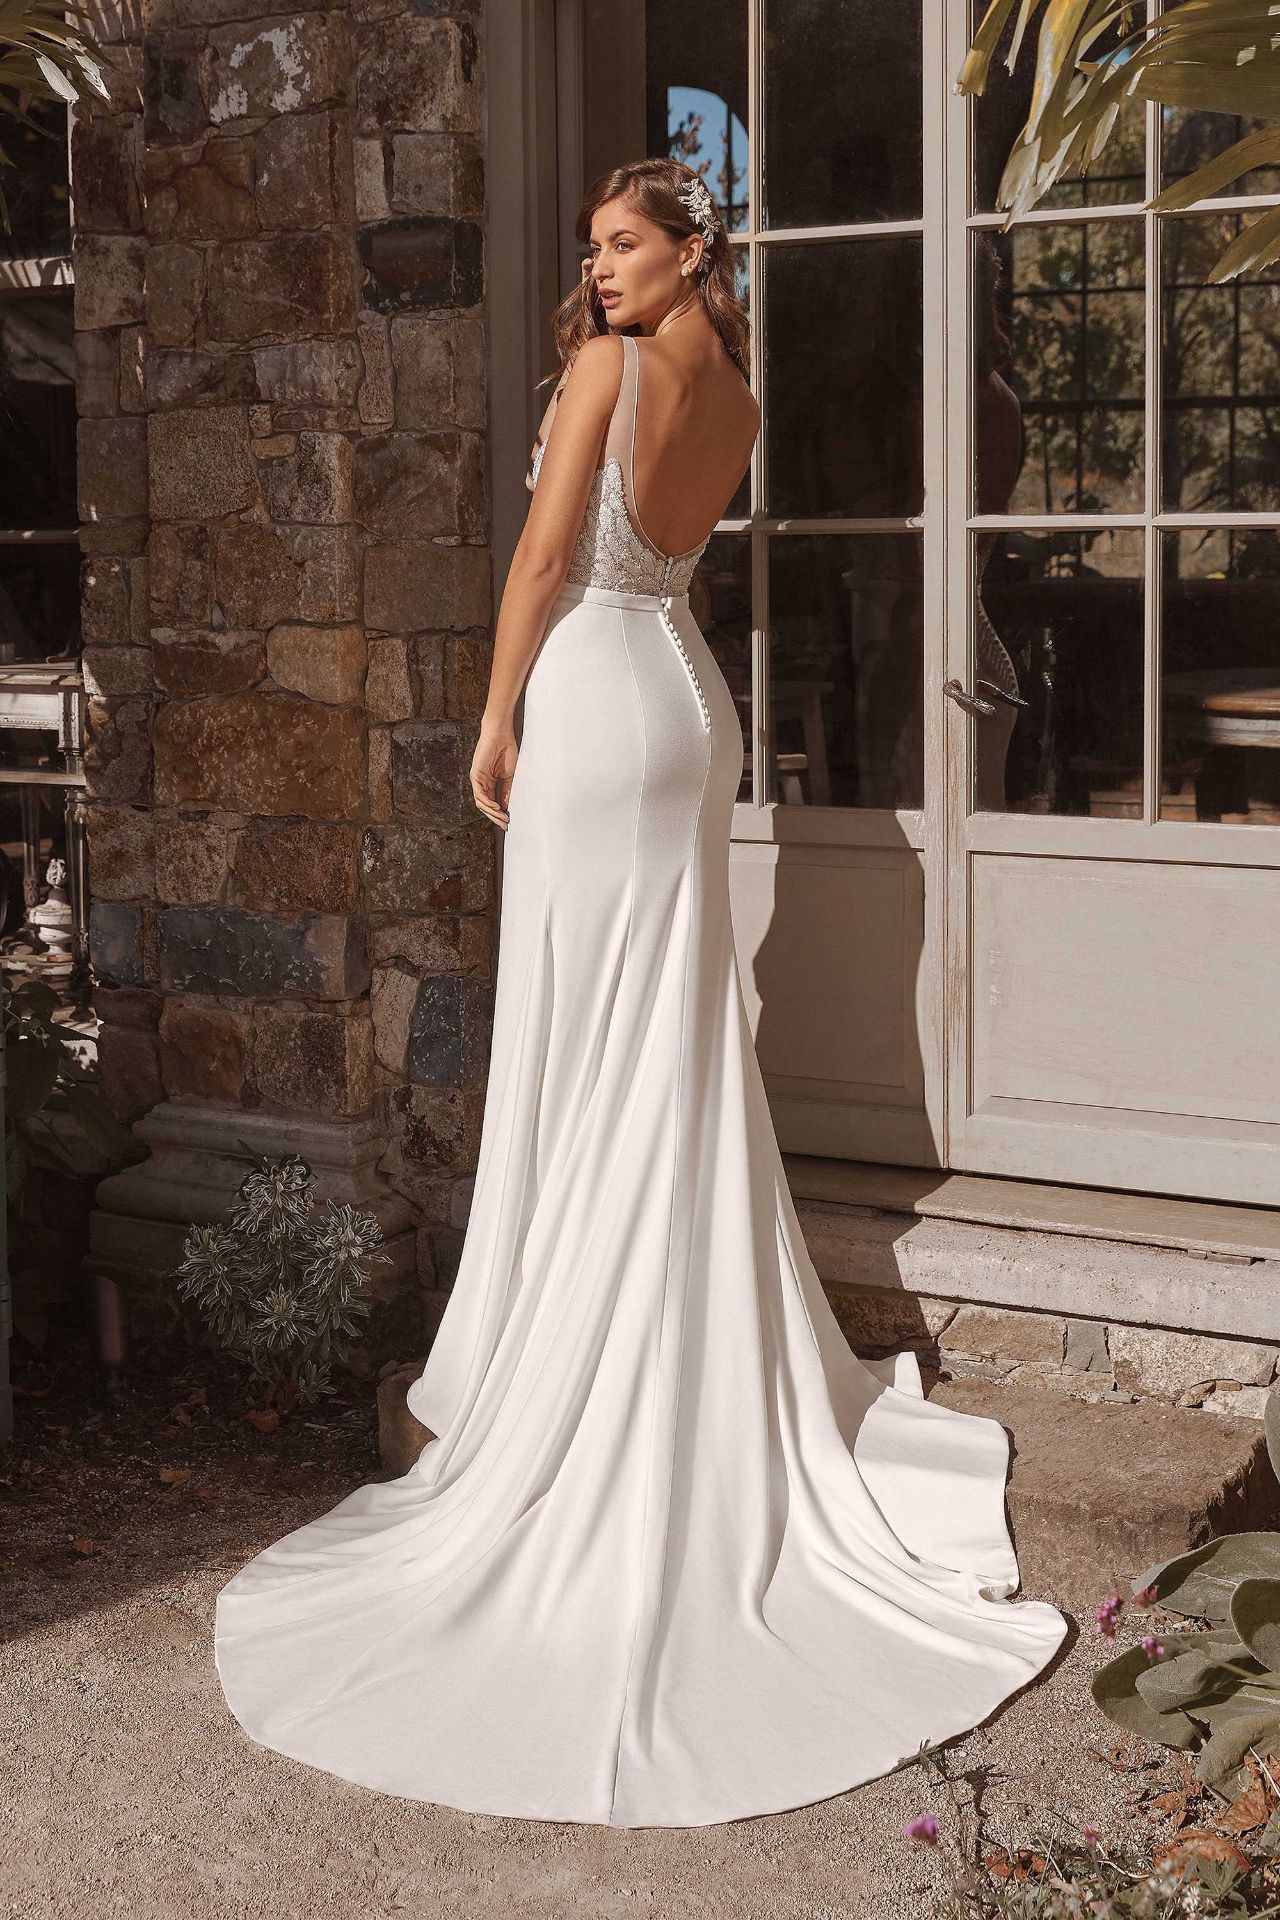 1 x Justin Alexander Crepe Fit & Flare Wedding Dress With V-Neck Bodice - Size 10 - RRP £1,725 - Image 3 of 7